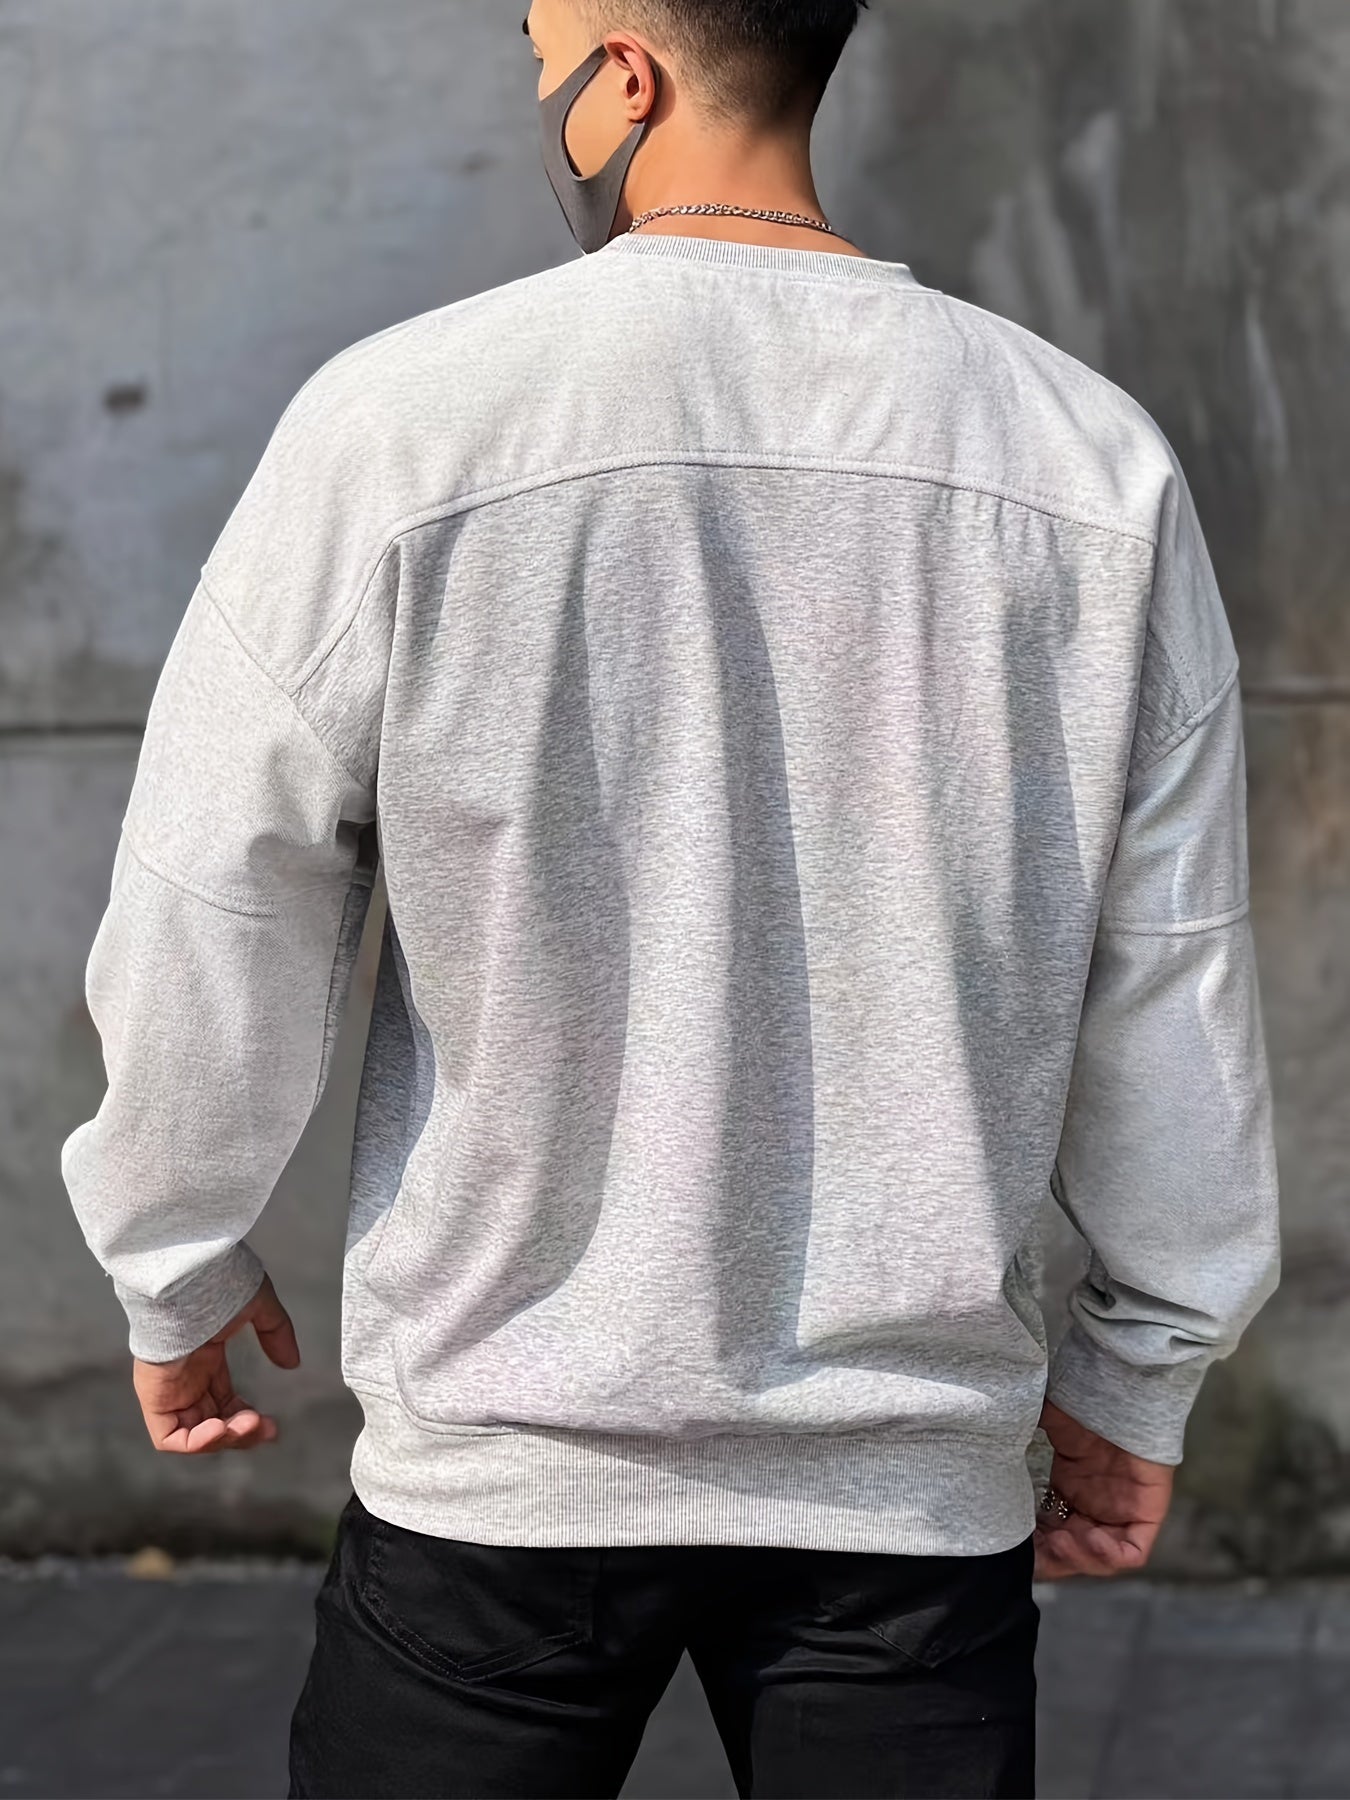 Men's Casual Sweatshirt - Oversized Pullover with Round Neck and Solid Color Design